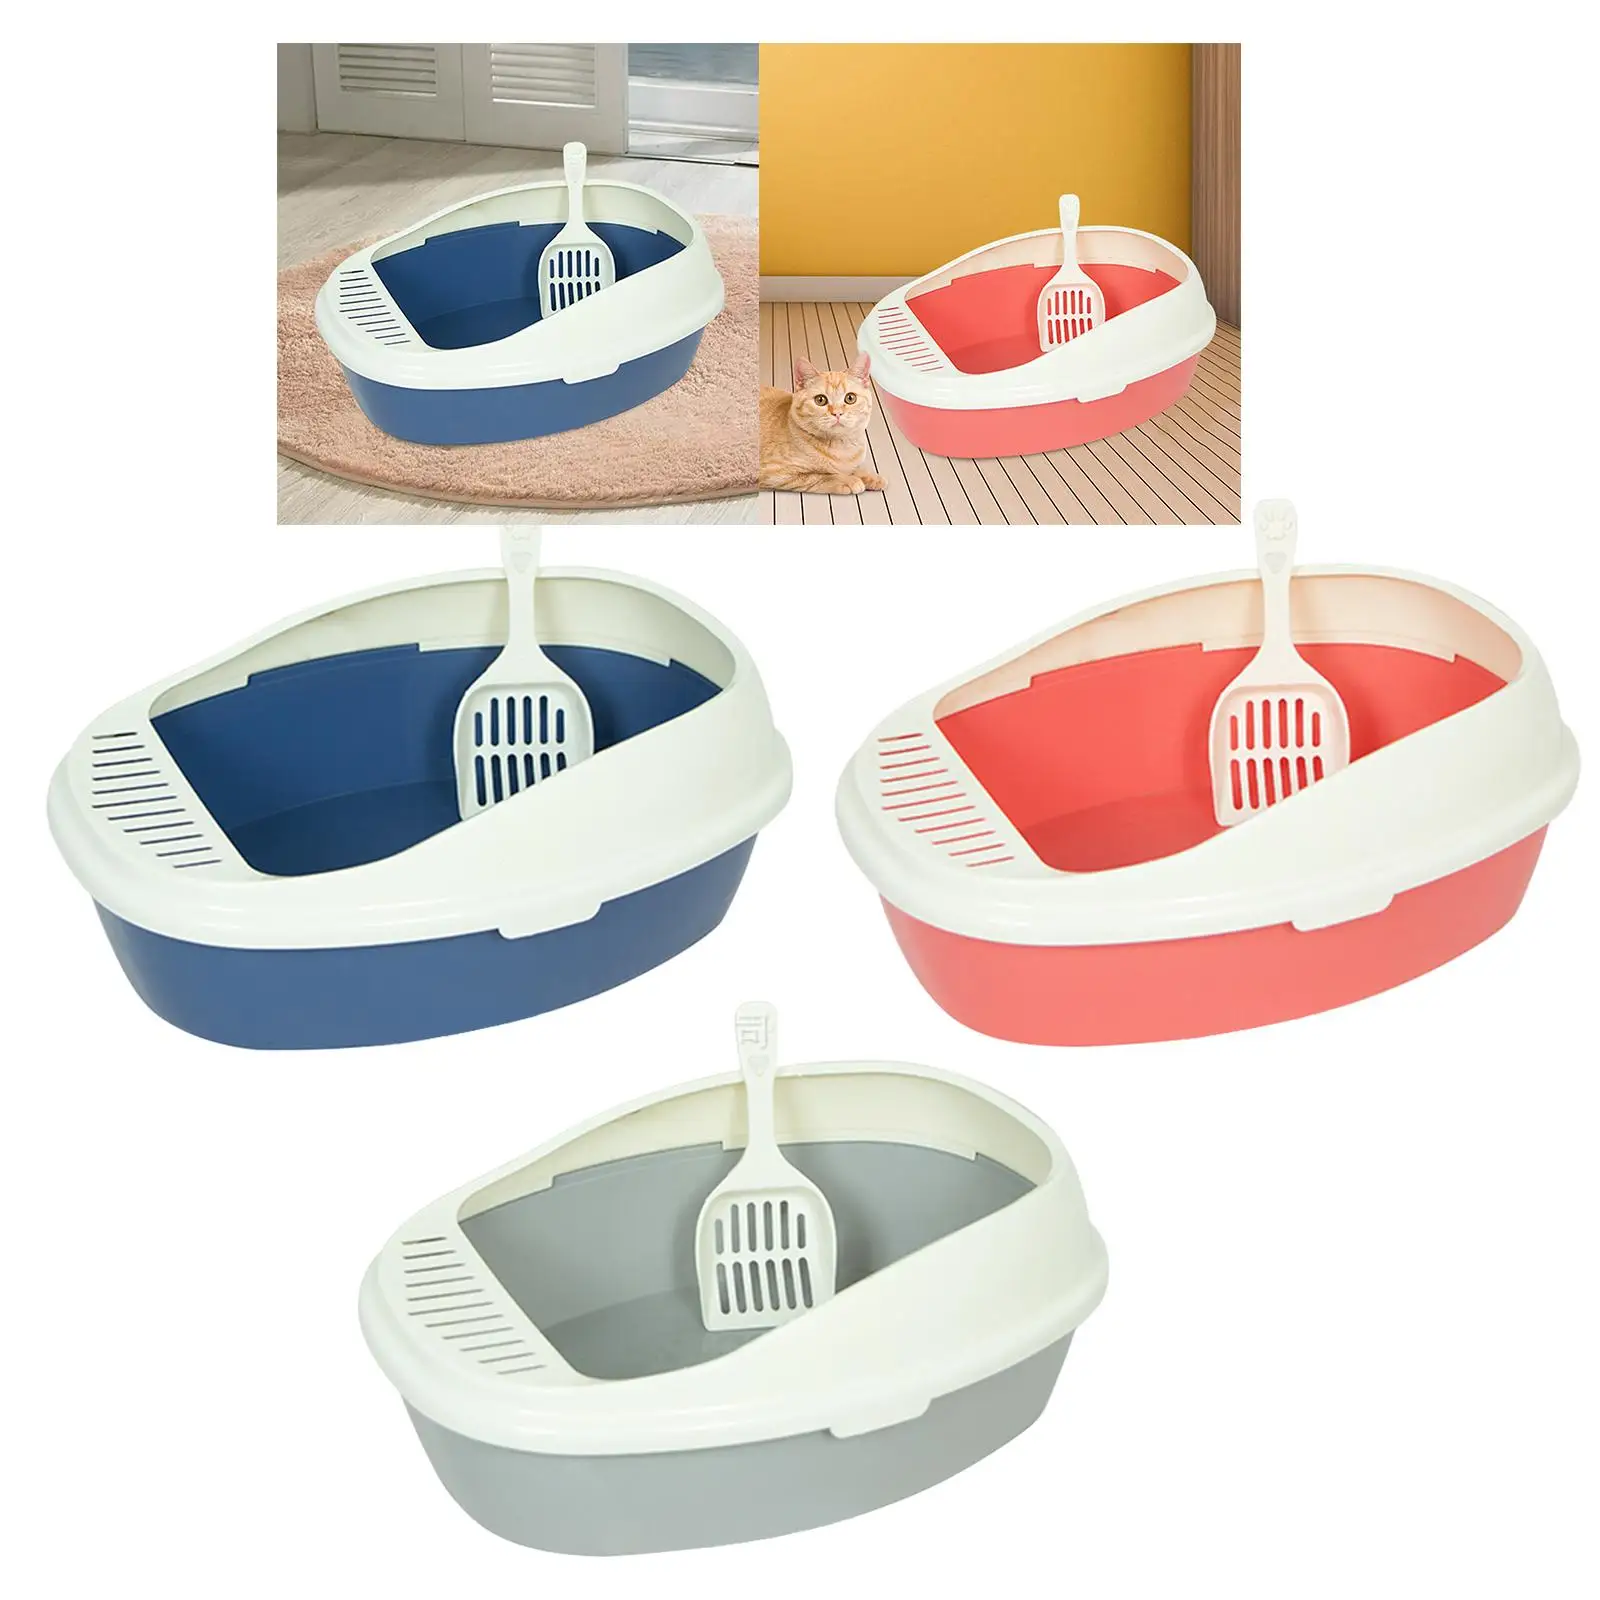 Cat Litter Box, Cat Sand Basin Durable Semi Enclosed Kitty Litter Pan Large Kitten Potty Toilet for Small Pets Pets Accessories